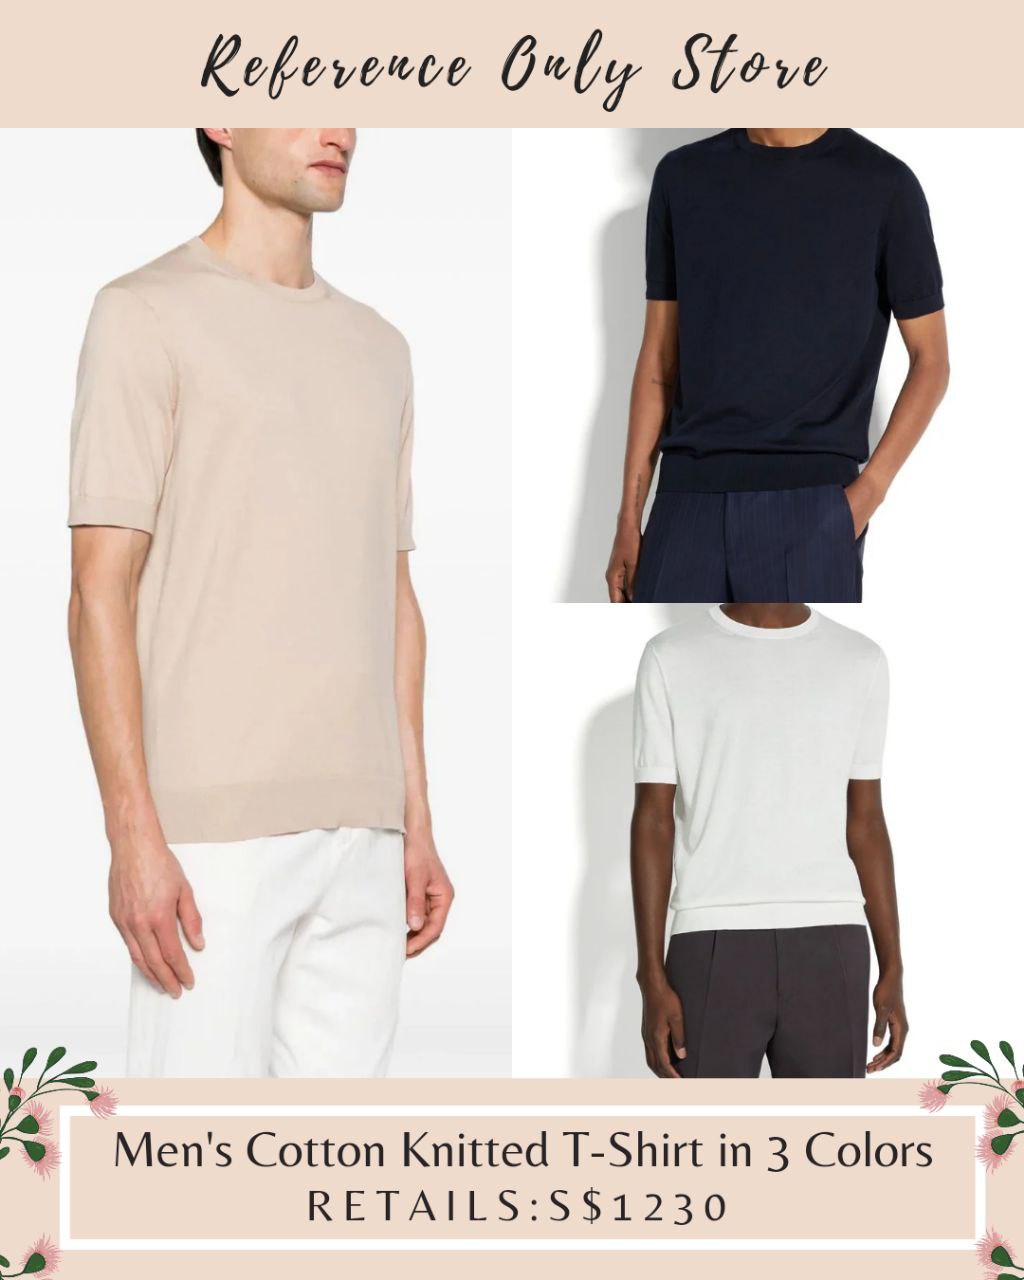 ZN Men's cotton knitted t shirt in 3 colors